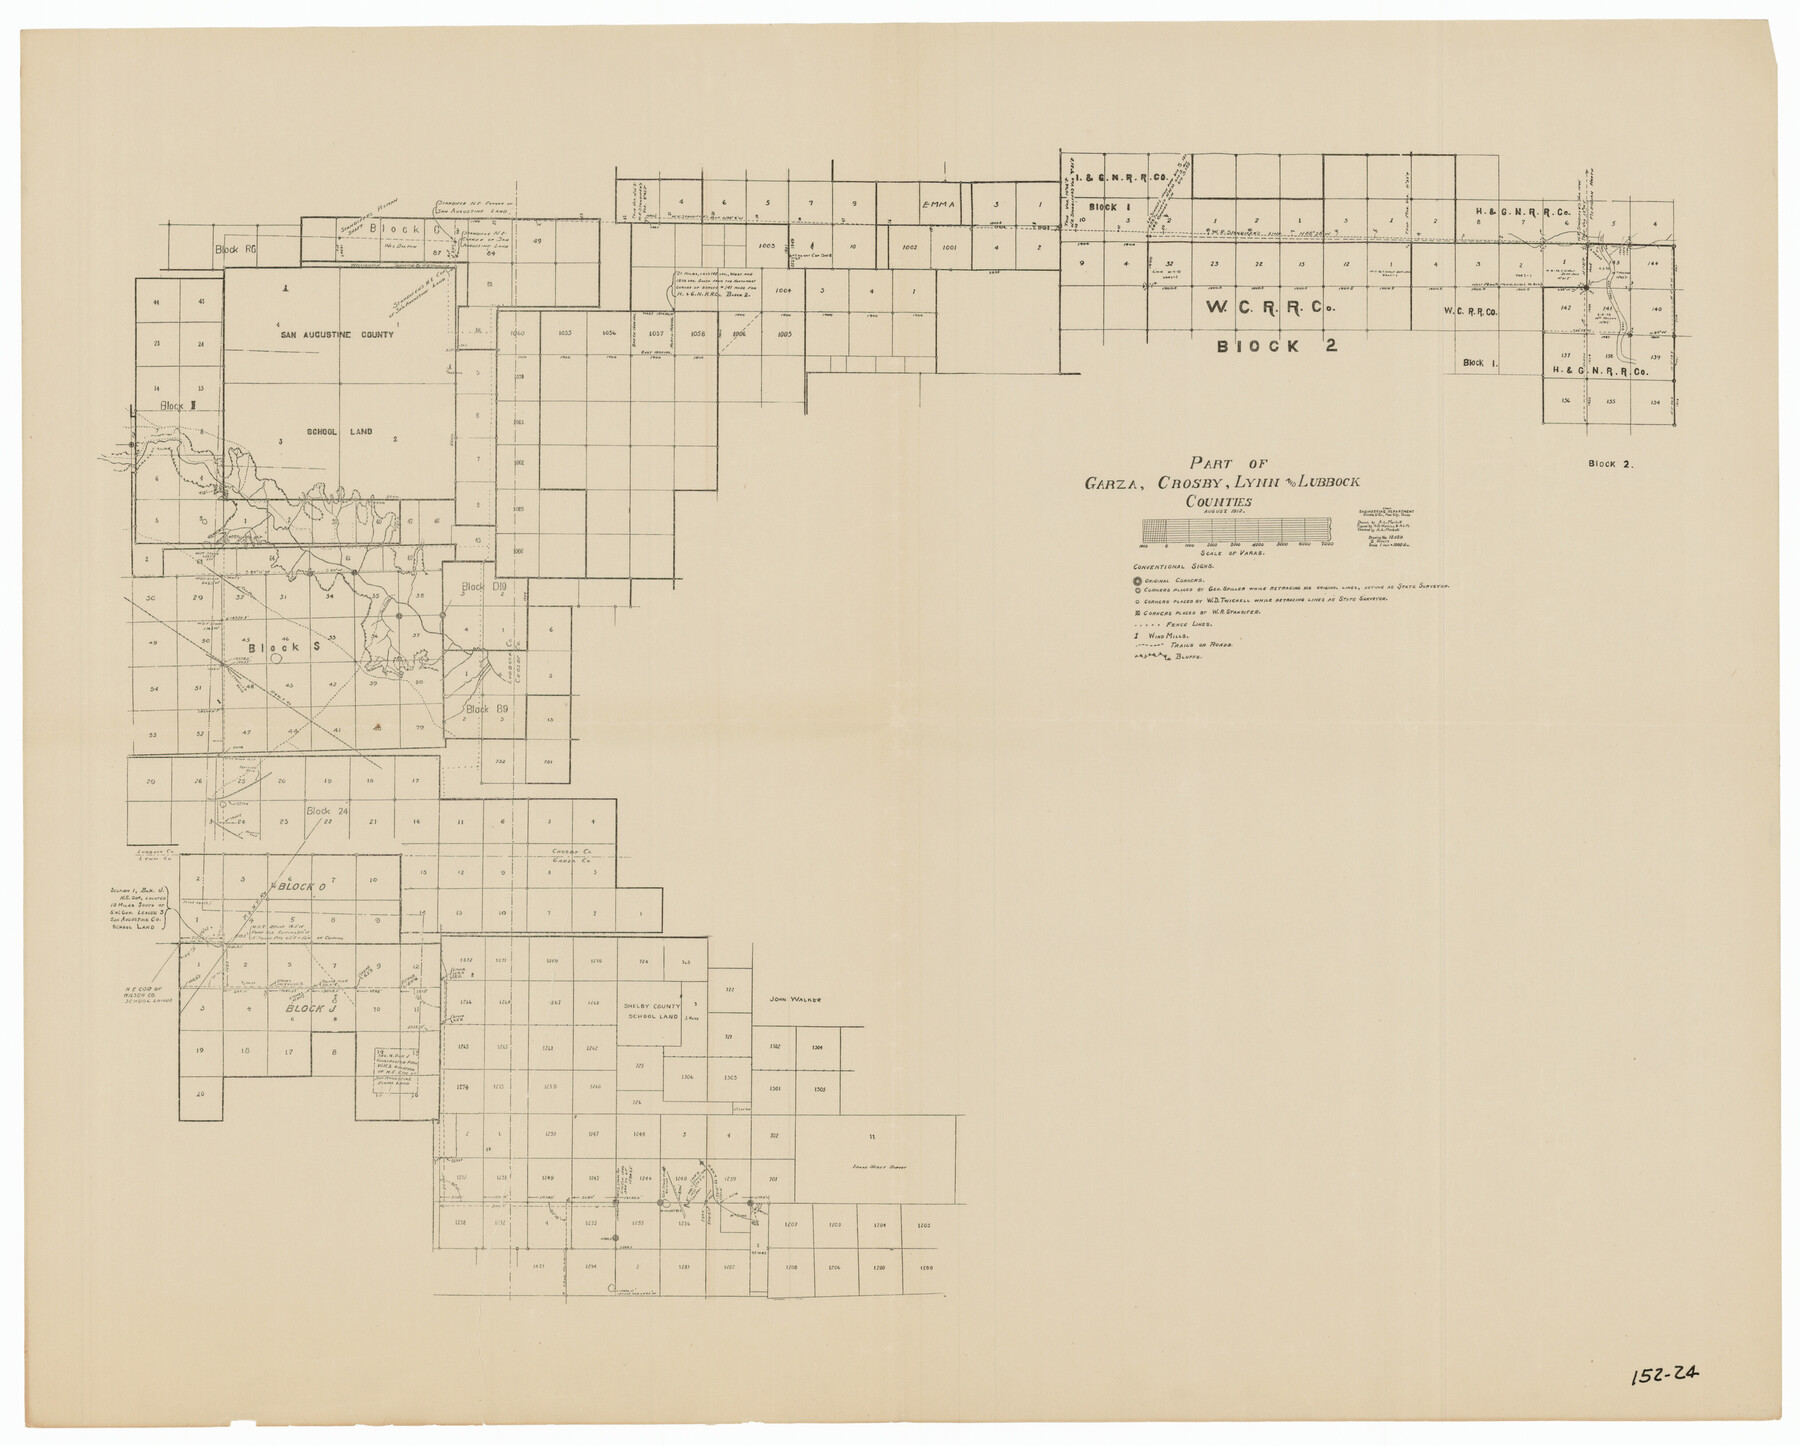 91328, Part of Garza, Crosby, Lynn, and Lubbock Counties, Twichell Survey Records